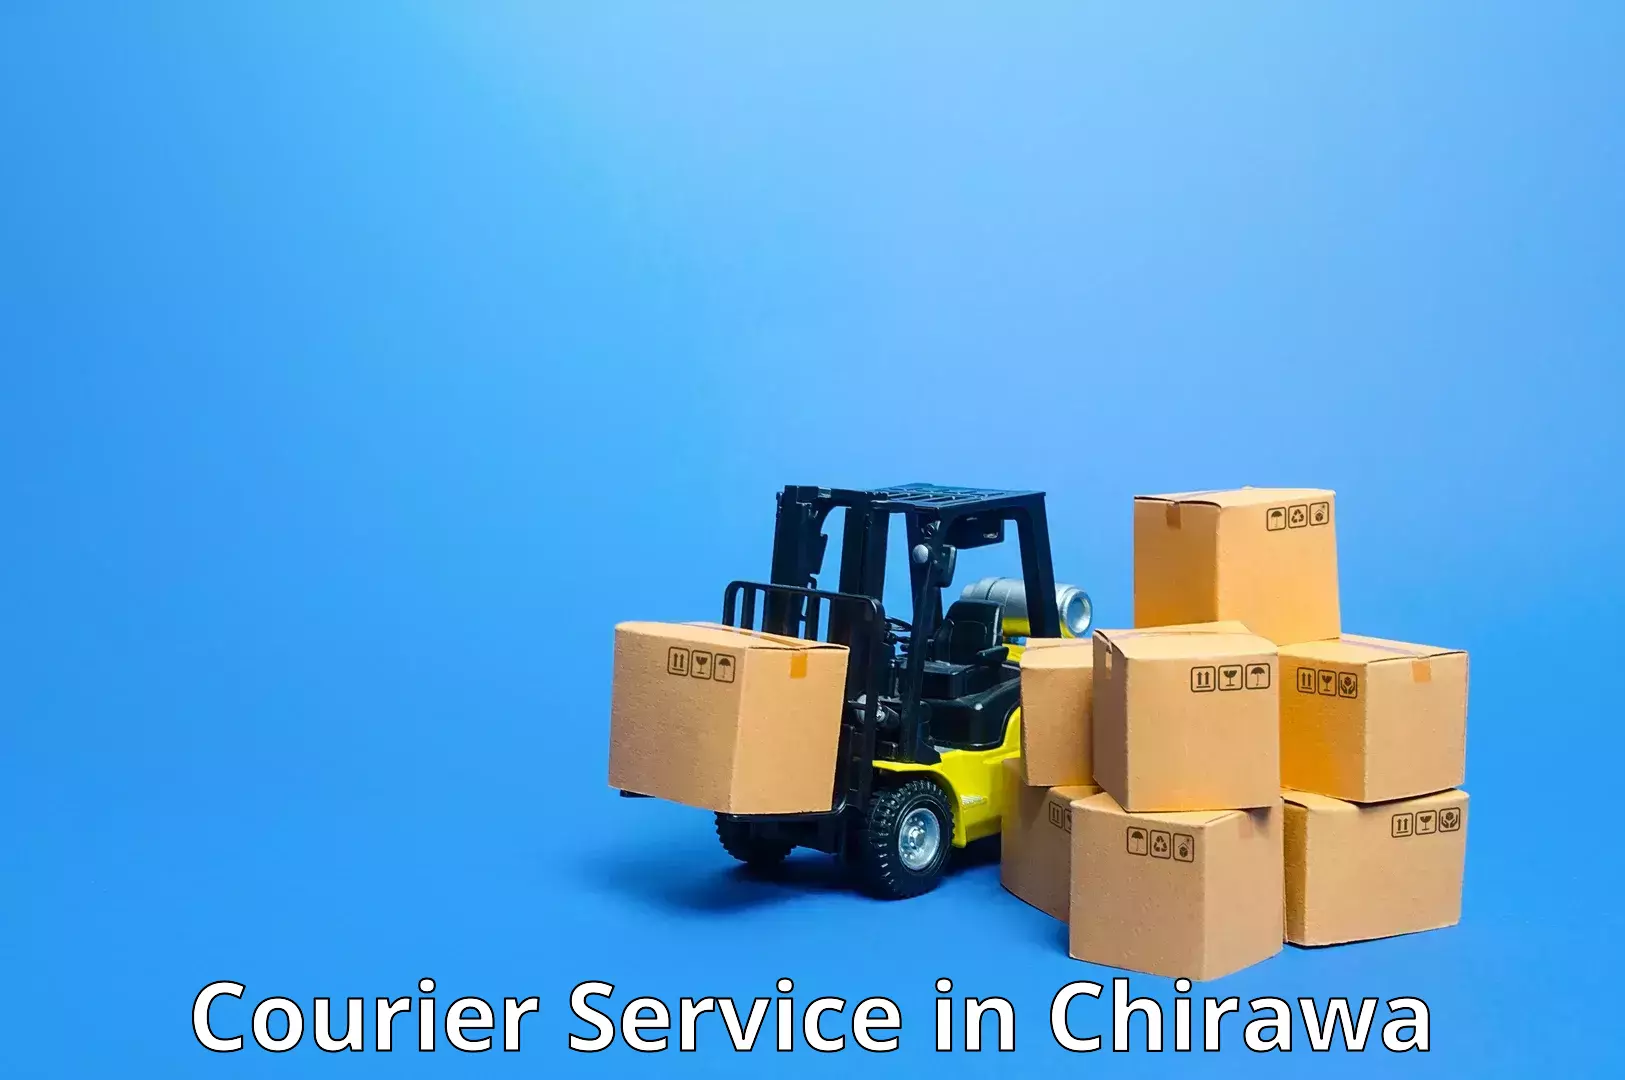 Customer-focused courier in Chirawa